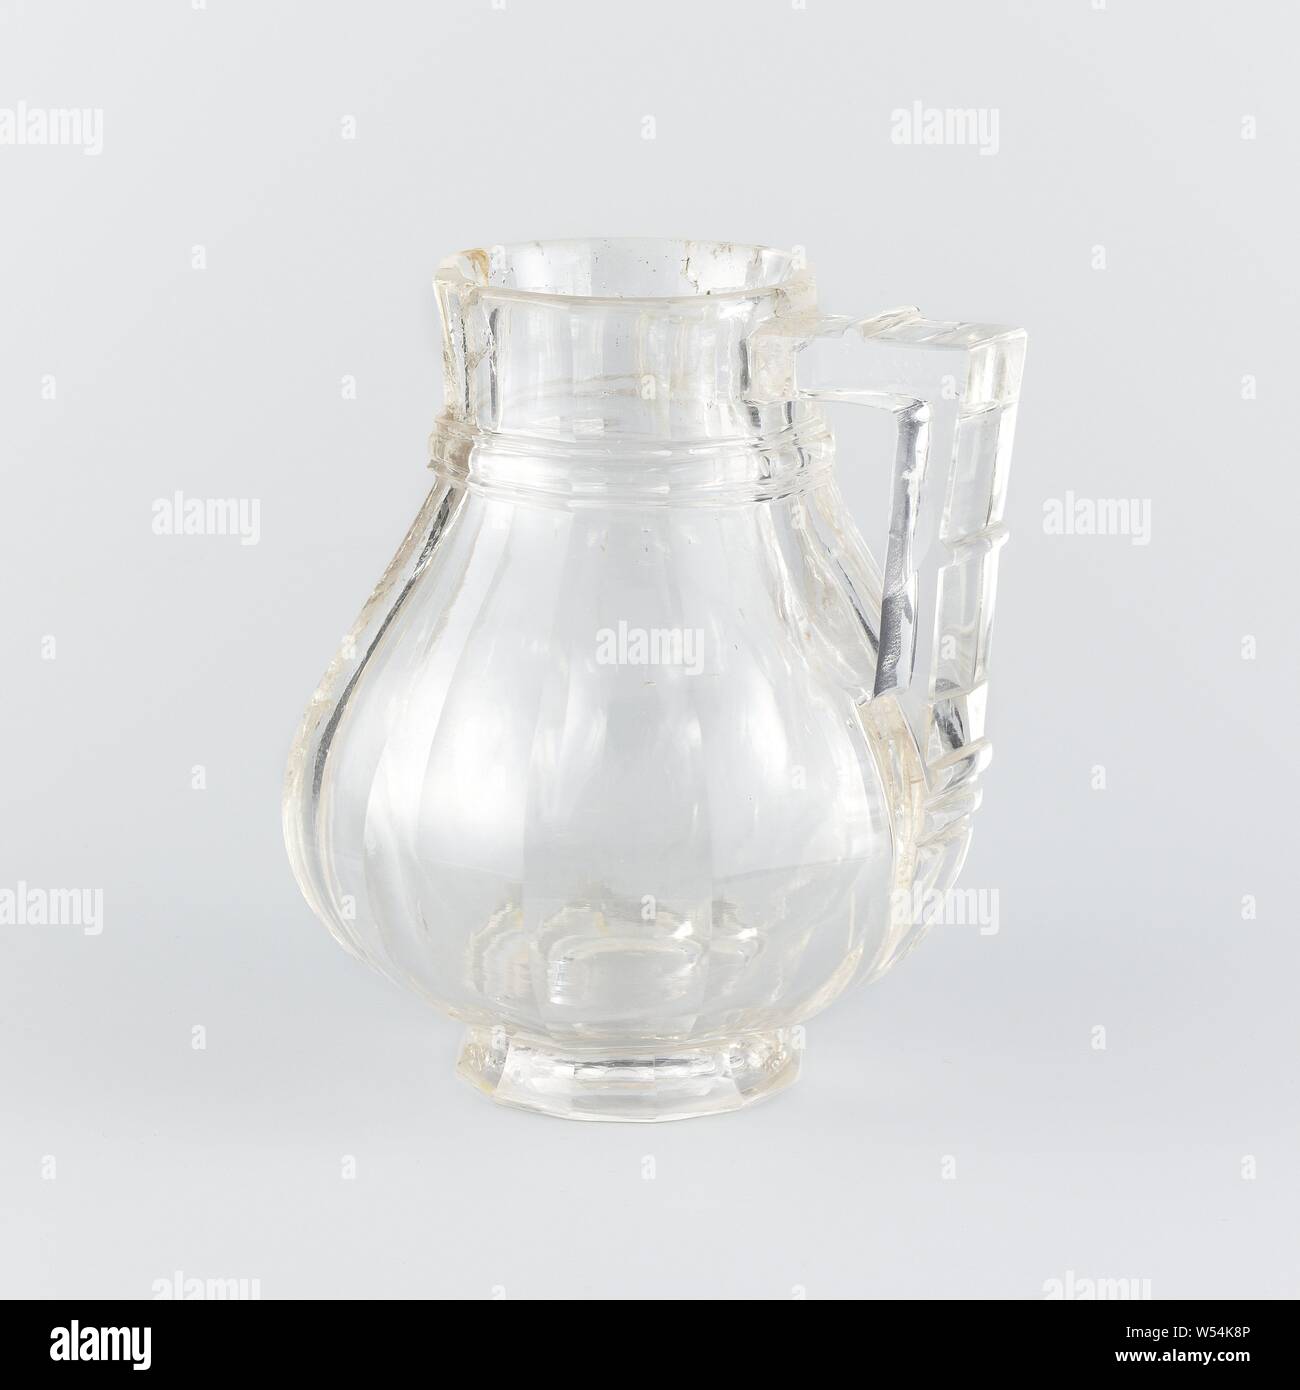 Ewer, Jug, sharpened in twelve vertical facets, Jug made of rock crystal with gold-plated silver frames. The pear-shaped vessel is ground in twelve vertical facets. A convex profile runs around the neck. The square rectangular section has three protrusions. Landscapes are engraved on the frame of the foot and neck. The lid, which is also cut in twelve facets, is crowned with a lion's head in gold-plated silver., anonymous, Zuid-Italie (possibly), c. 1350, silver (metal), gilding, h 17.0 cm × w 15.9 cm × d 14.5 cm d 7.3 cm Stock Photo